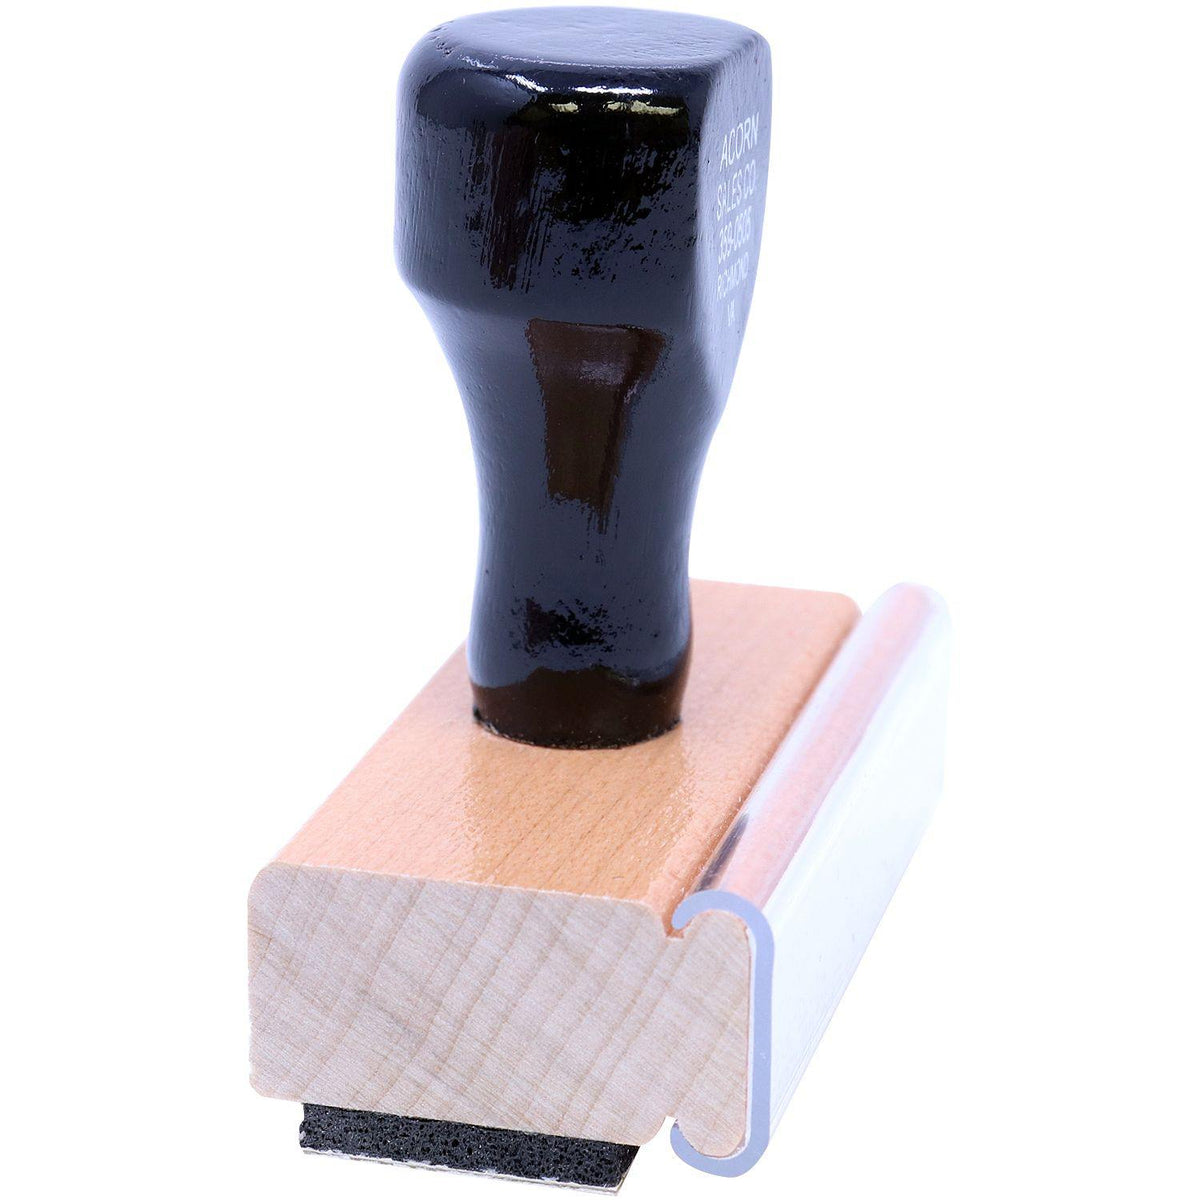 Side View of Unclassified Rubber Stamp at an Angle